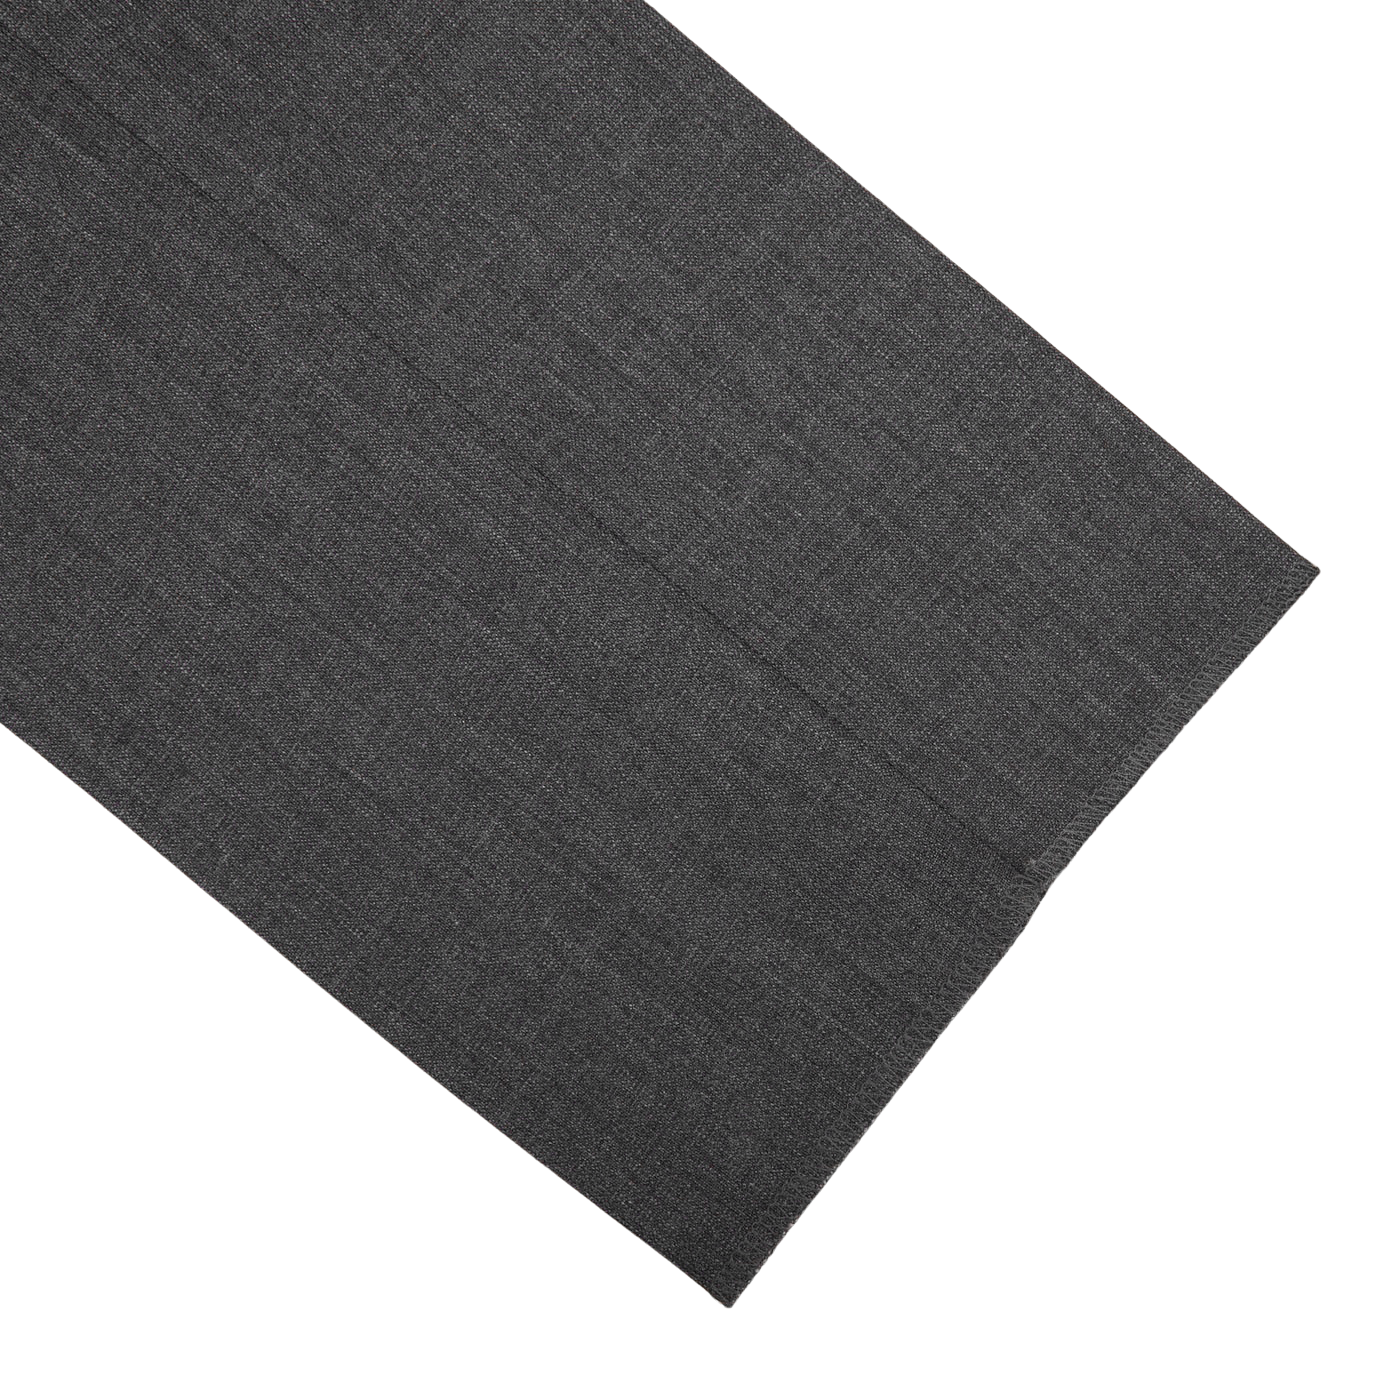 A close-up of a Ring Jacket dark grey high twist wool suit fabric swatch with a subtle texture, displayed on a white background.